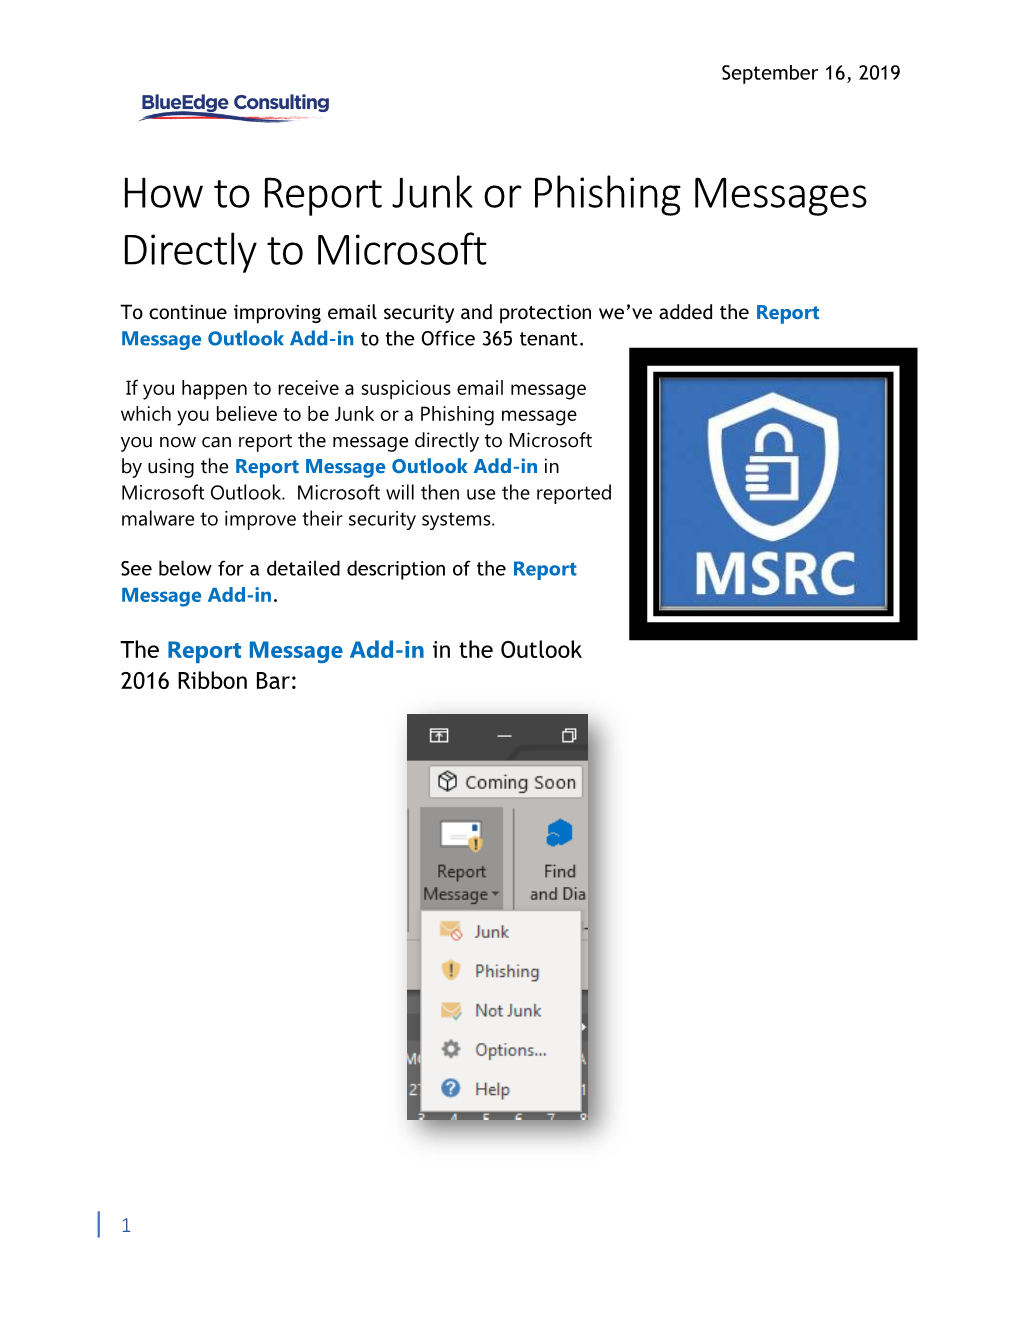 How to Report Junk Or Phishing Messages Directly to Microsoft